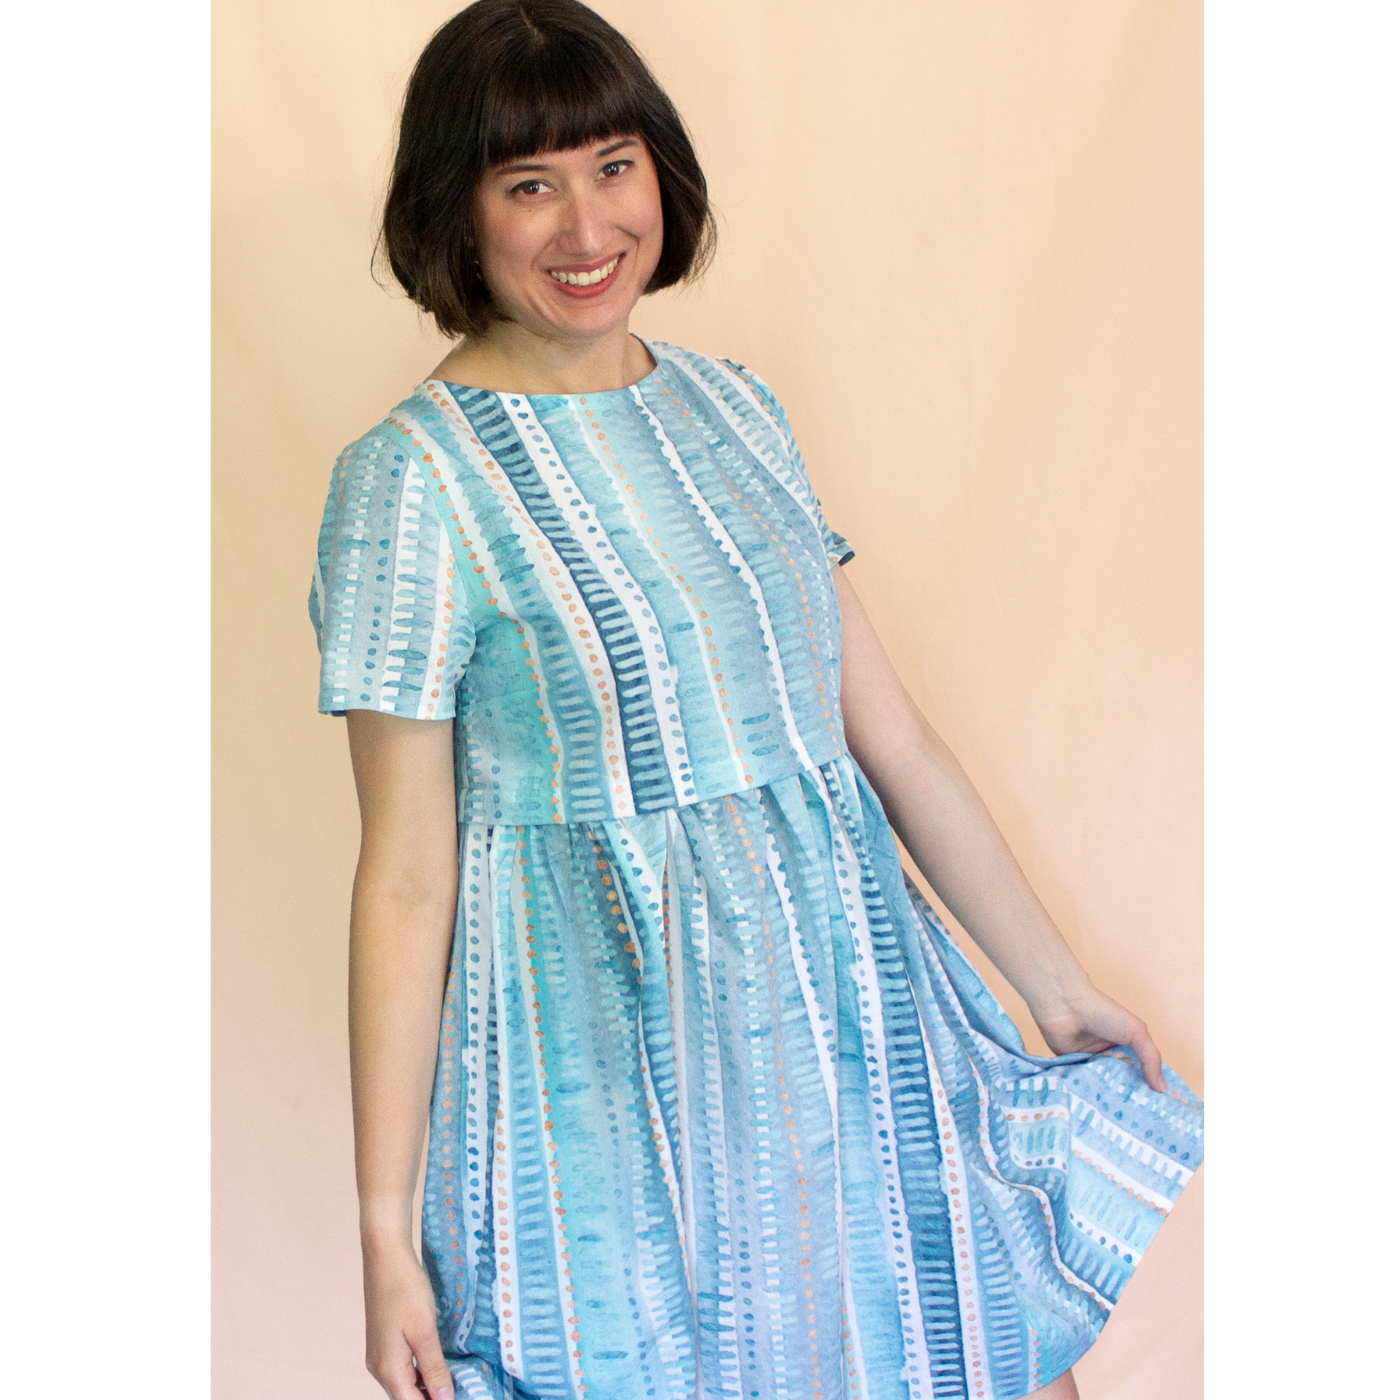 Emily smiles at the camera and stands in front of a peach wall wearing a knee-length dress with a print with long vertical strips in various shades of blue, gray and white and small horizontal lines running down the vertical strips in a differing blue, gray or white.